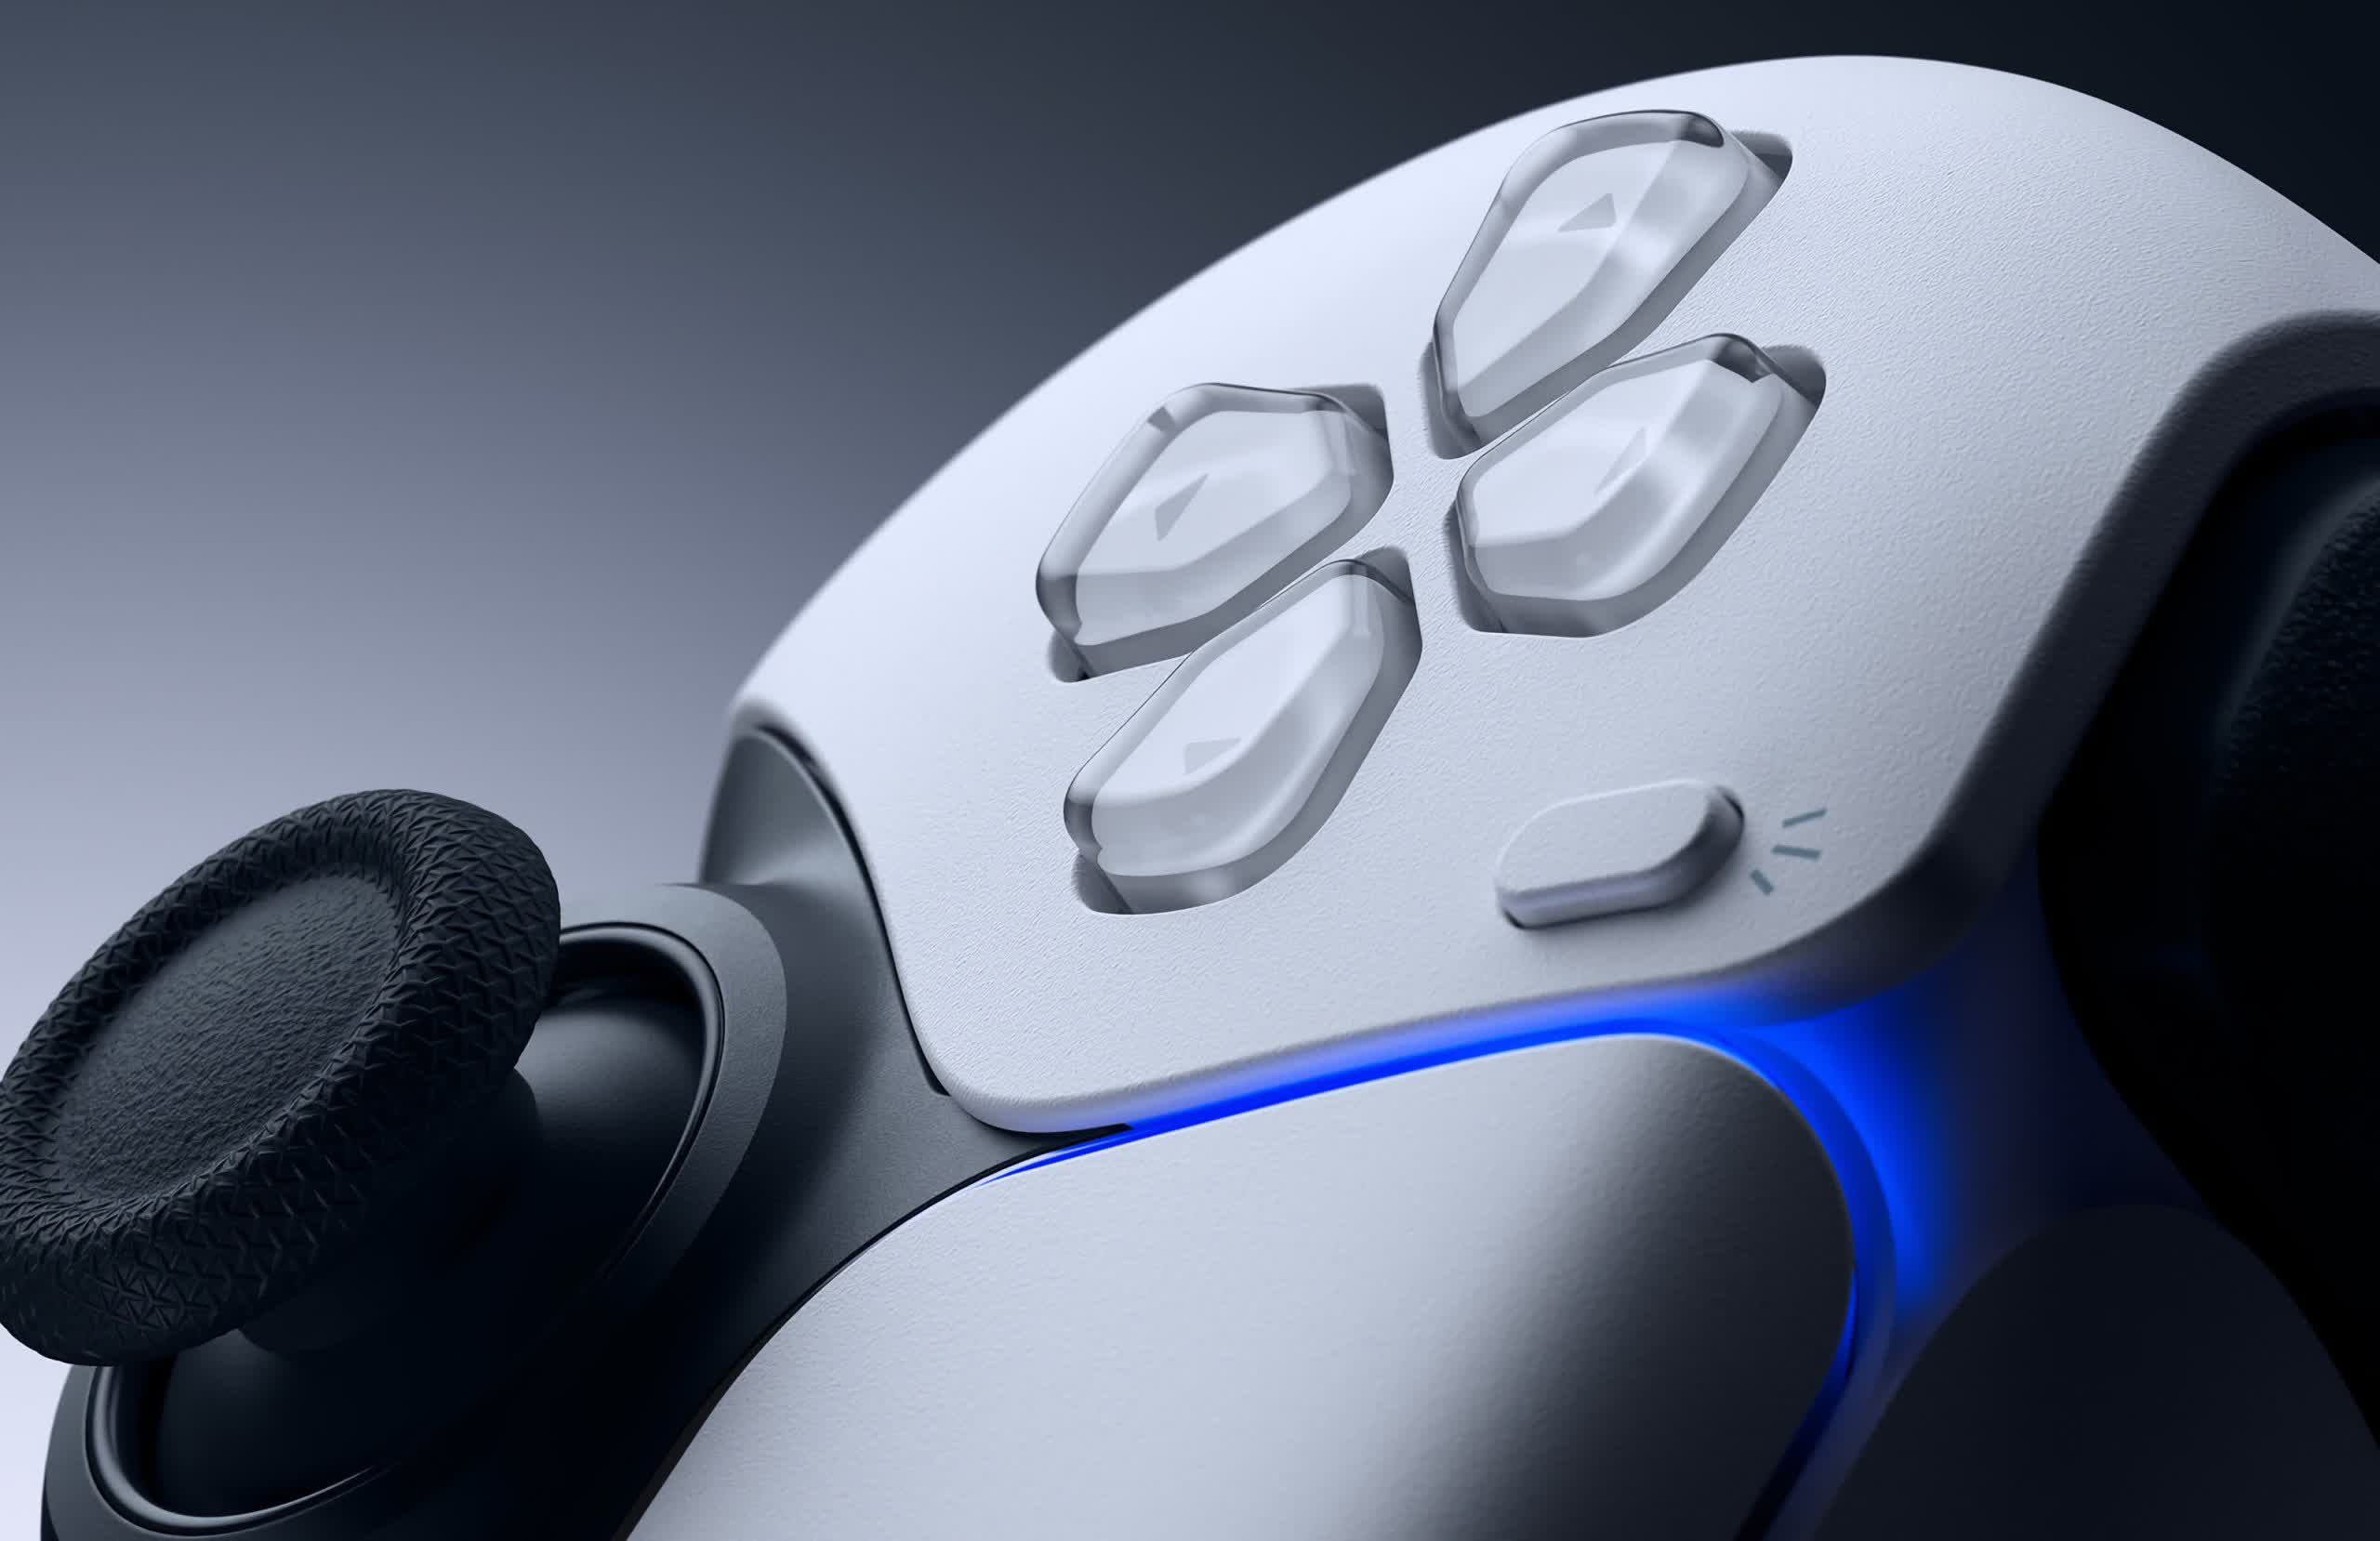 An upgraded Sony PS5 DualSense controller with 12-hour battery life may be in the works